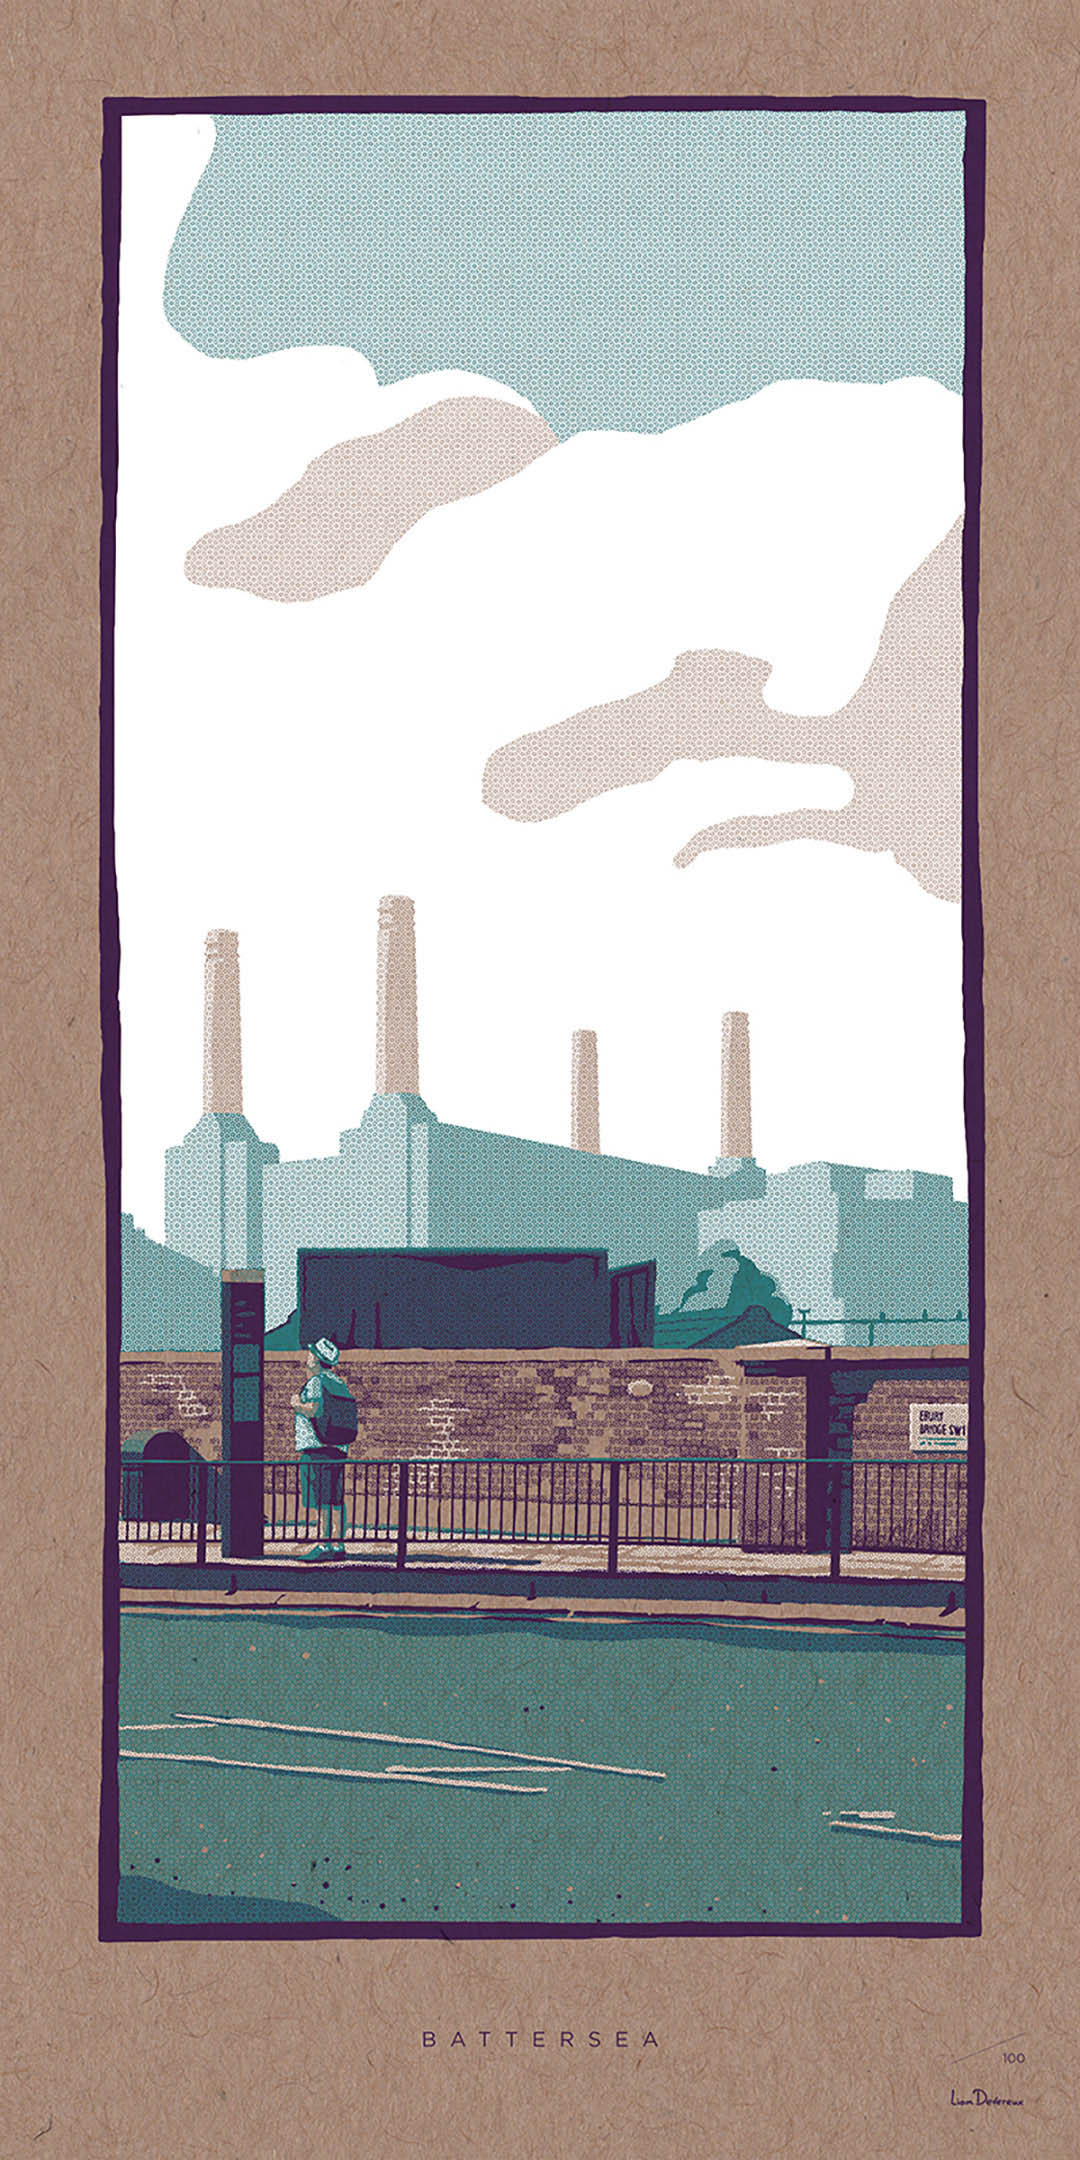 Battersea - Liam Devereux. 30x60mm Giclee print printed on 450mic recycled Kraft card